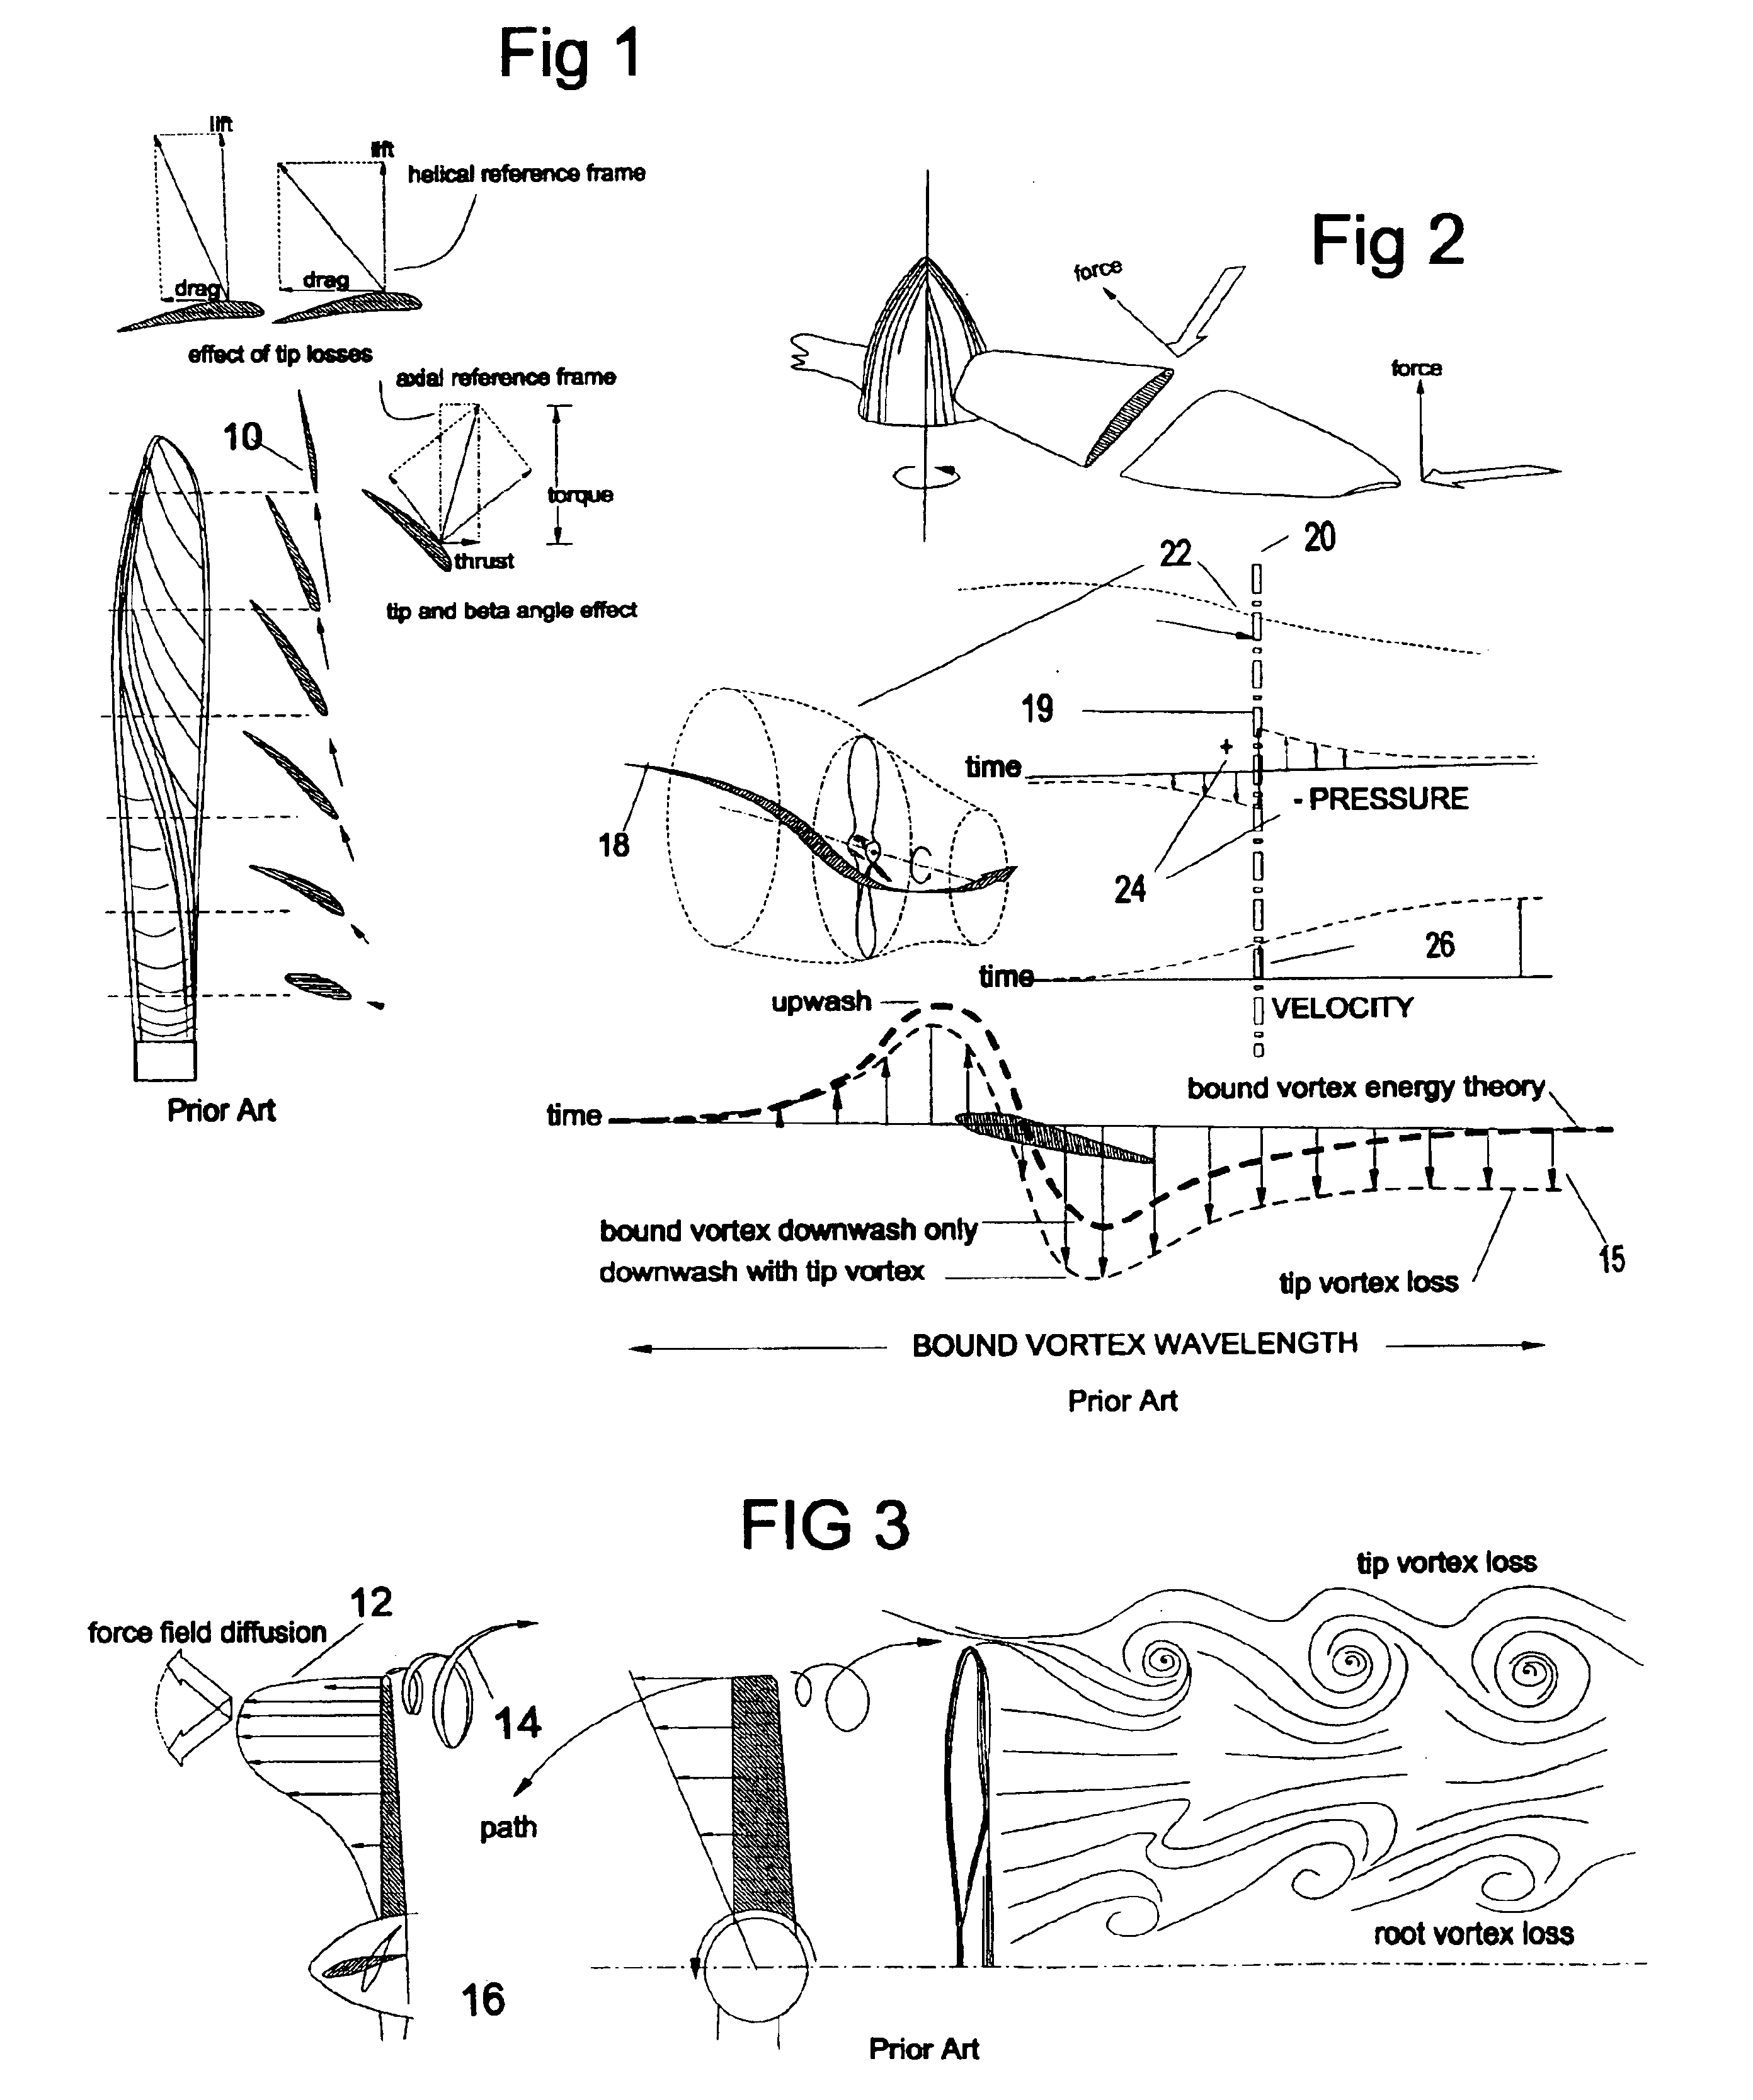 Spiral-based axial flow devices